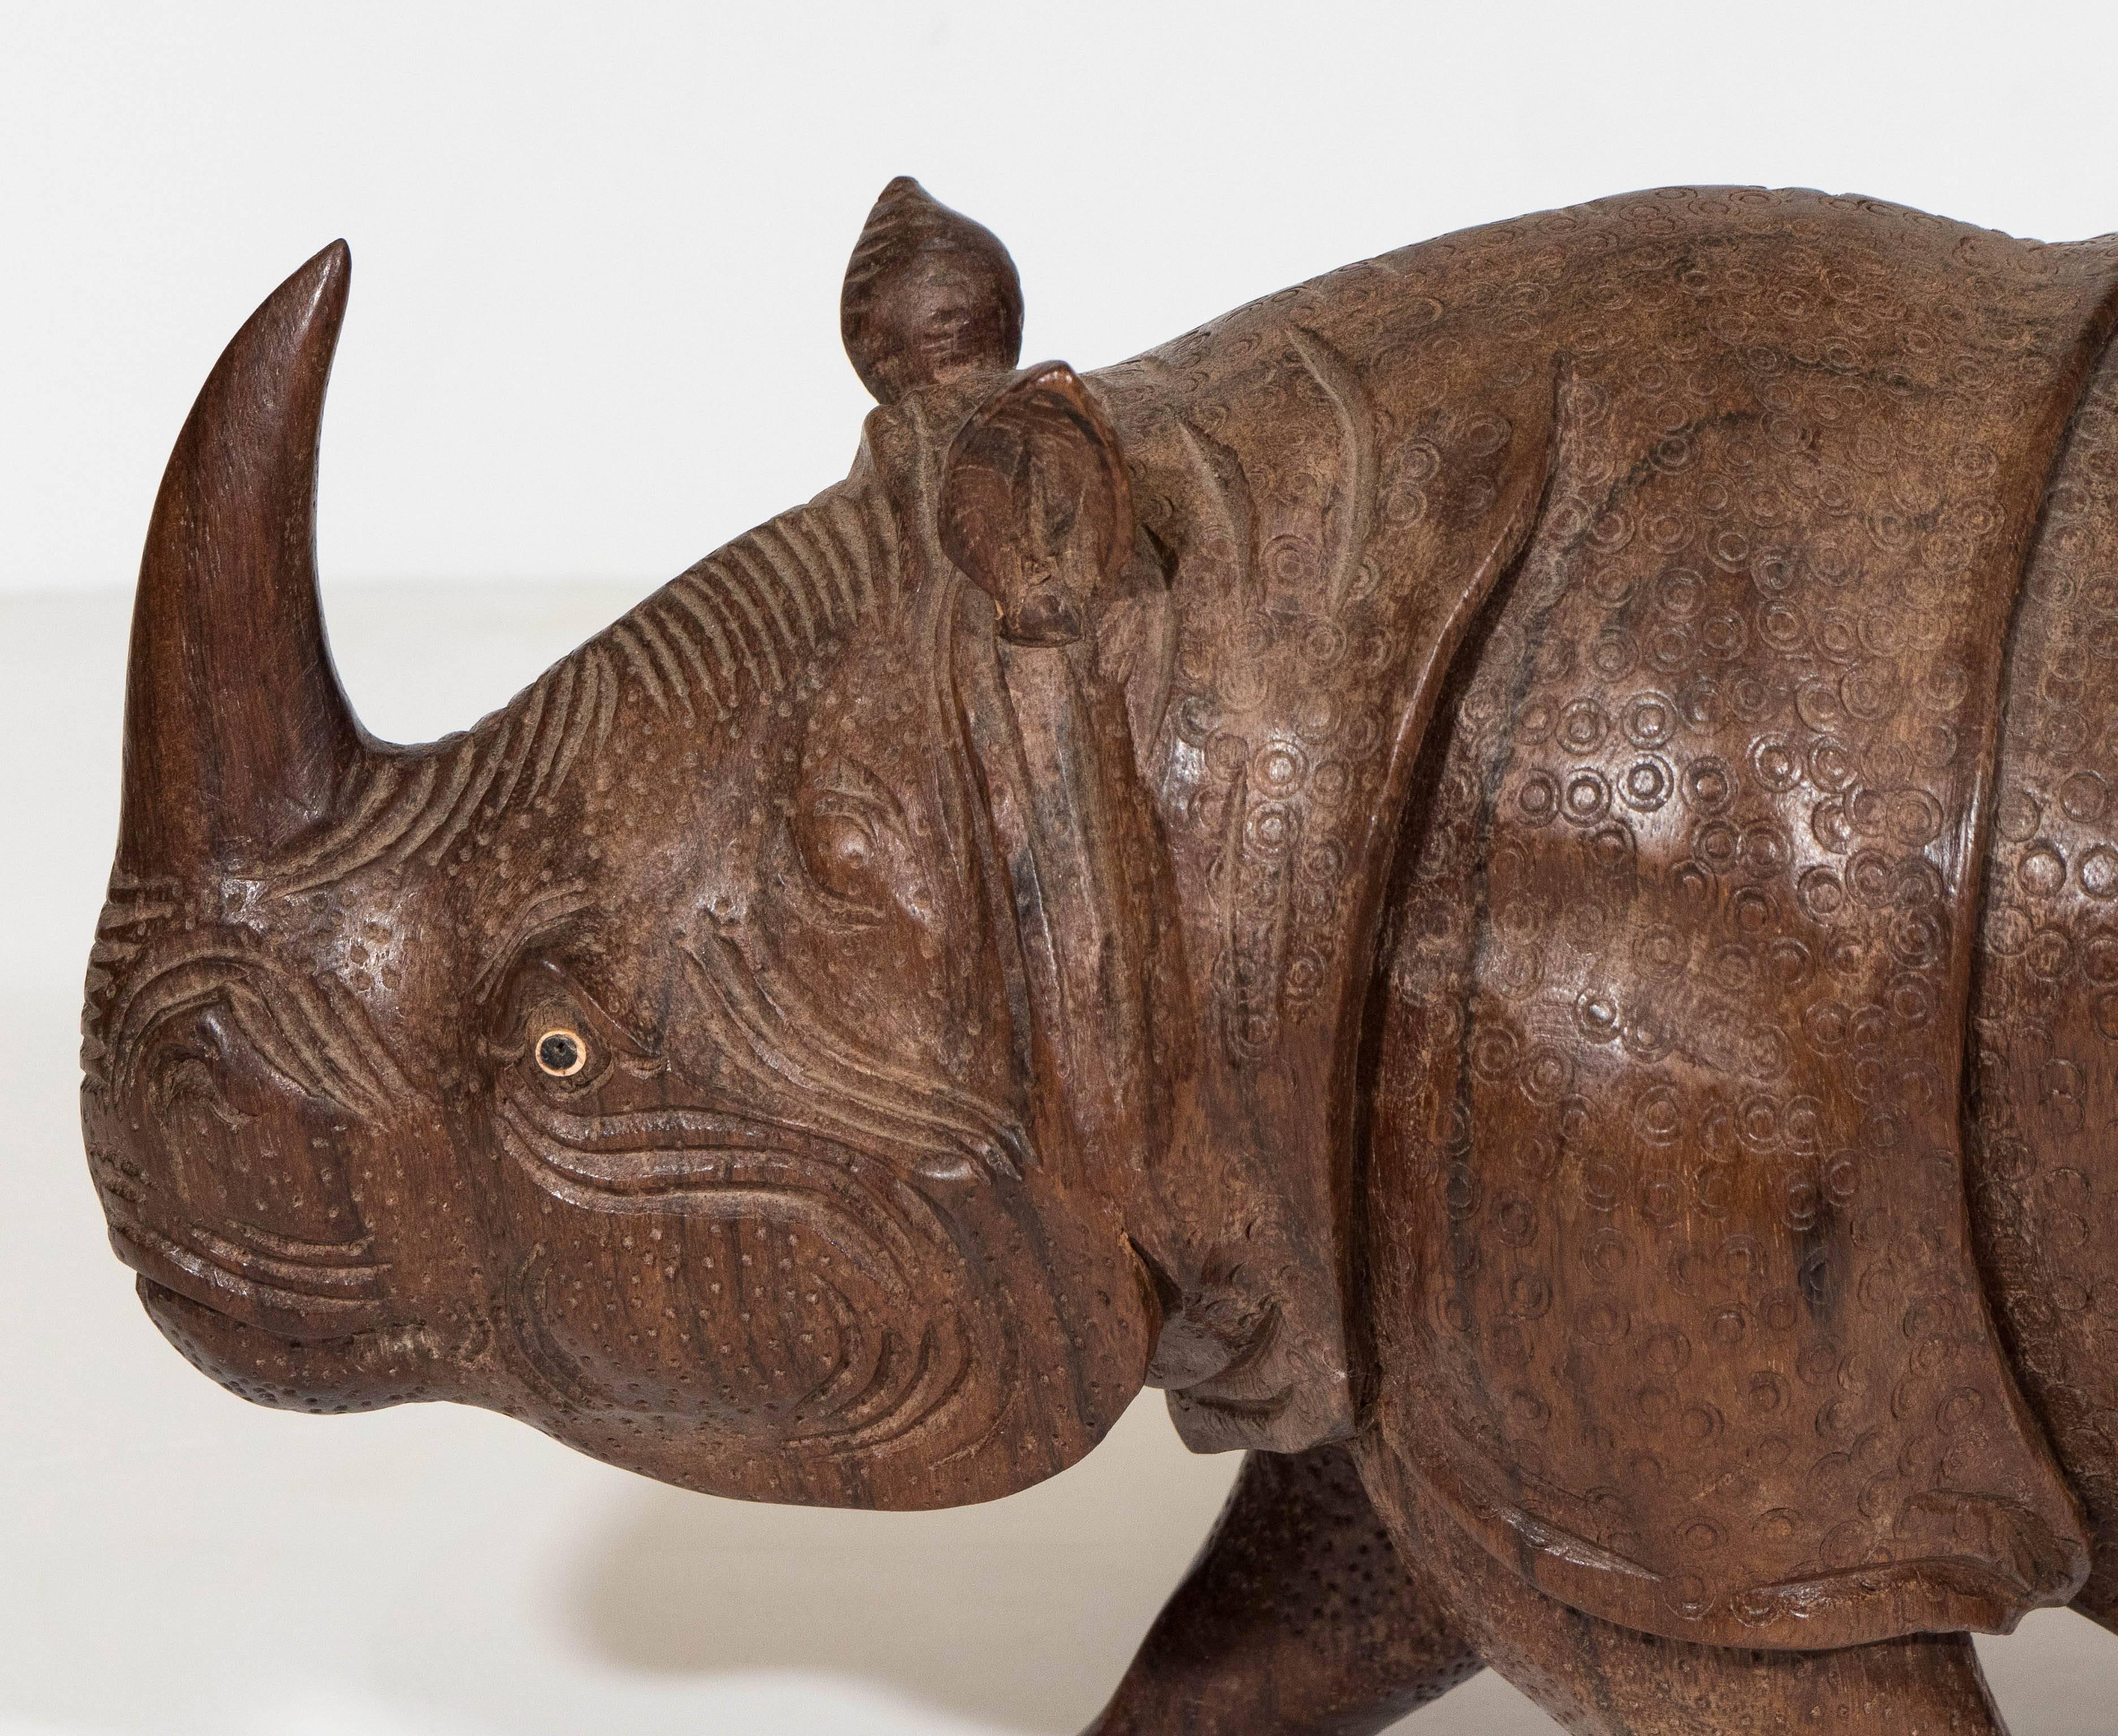 A vintage intricately detailed sculpture of a rhino in carved wood. This piece remains in very good condition, consistent with age and use.